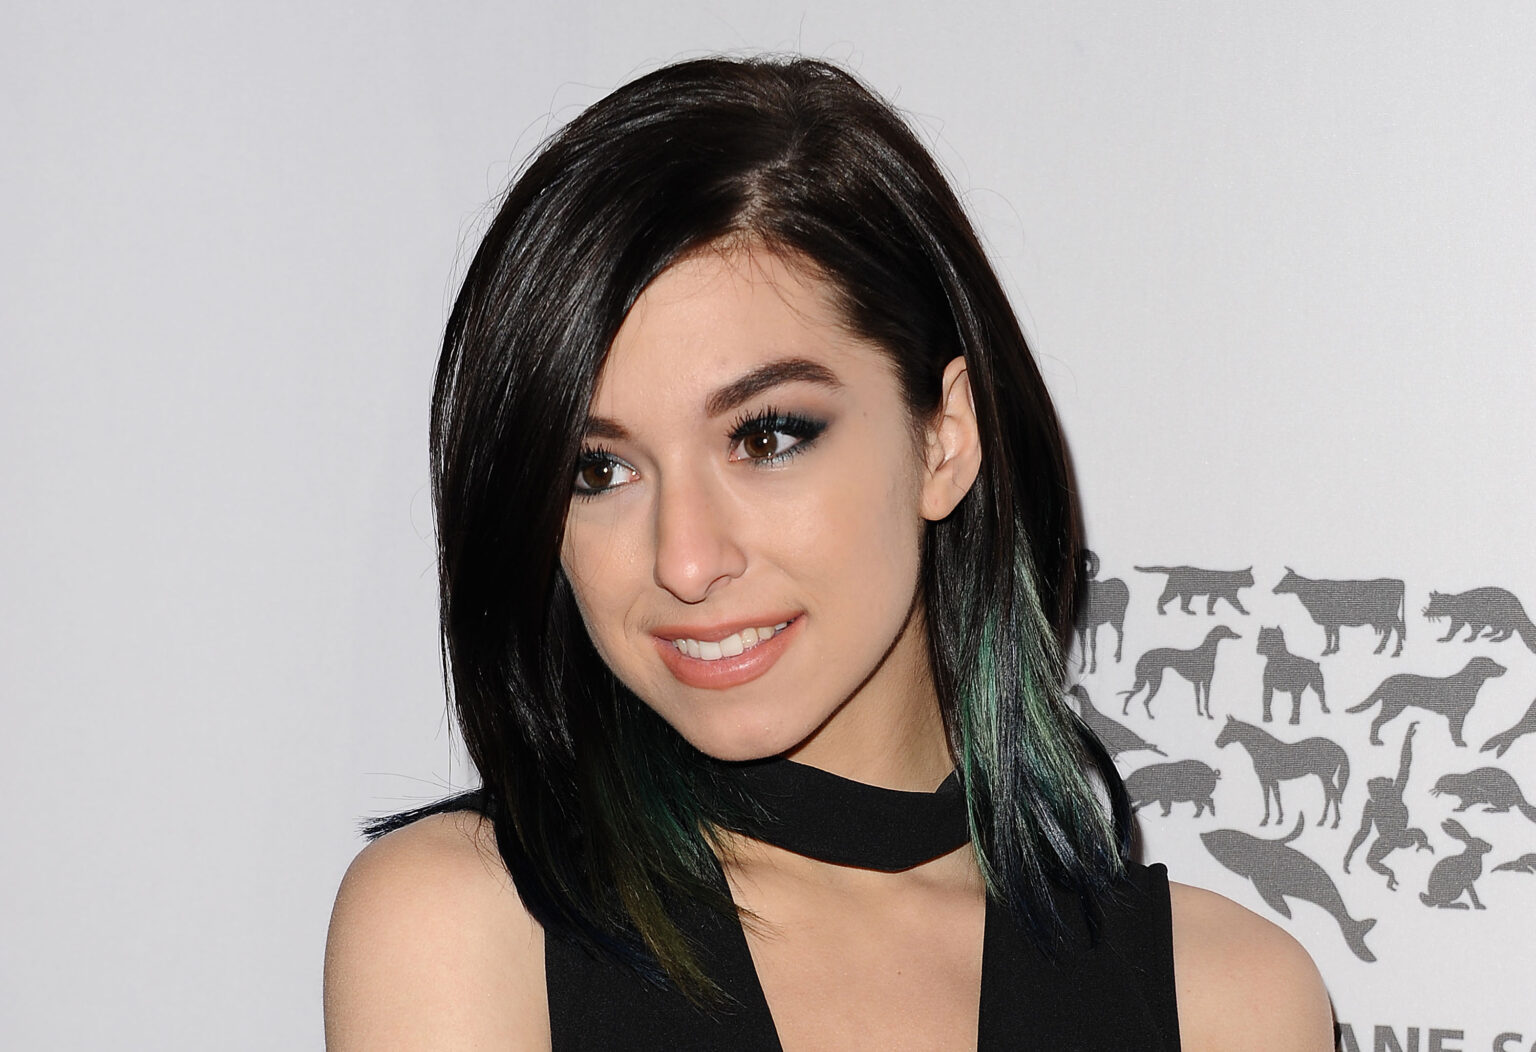 A talented singer, lost to the world. Christina Grimmie lost her life in 2016 thanks to an obsessive fan turned into an enemy.